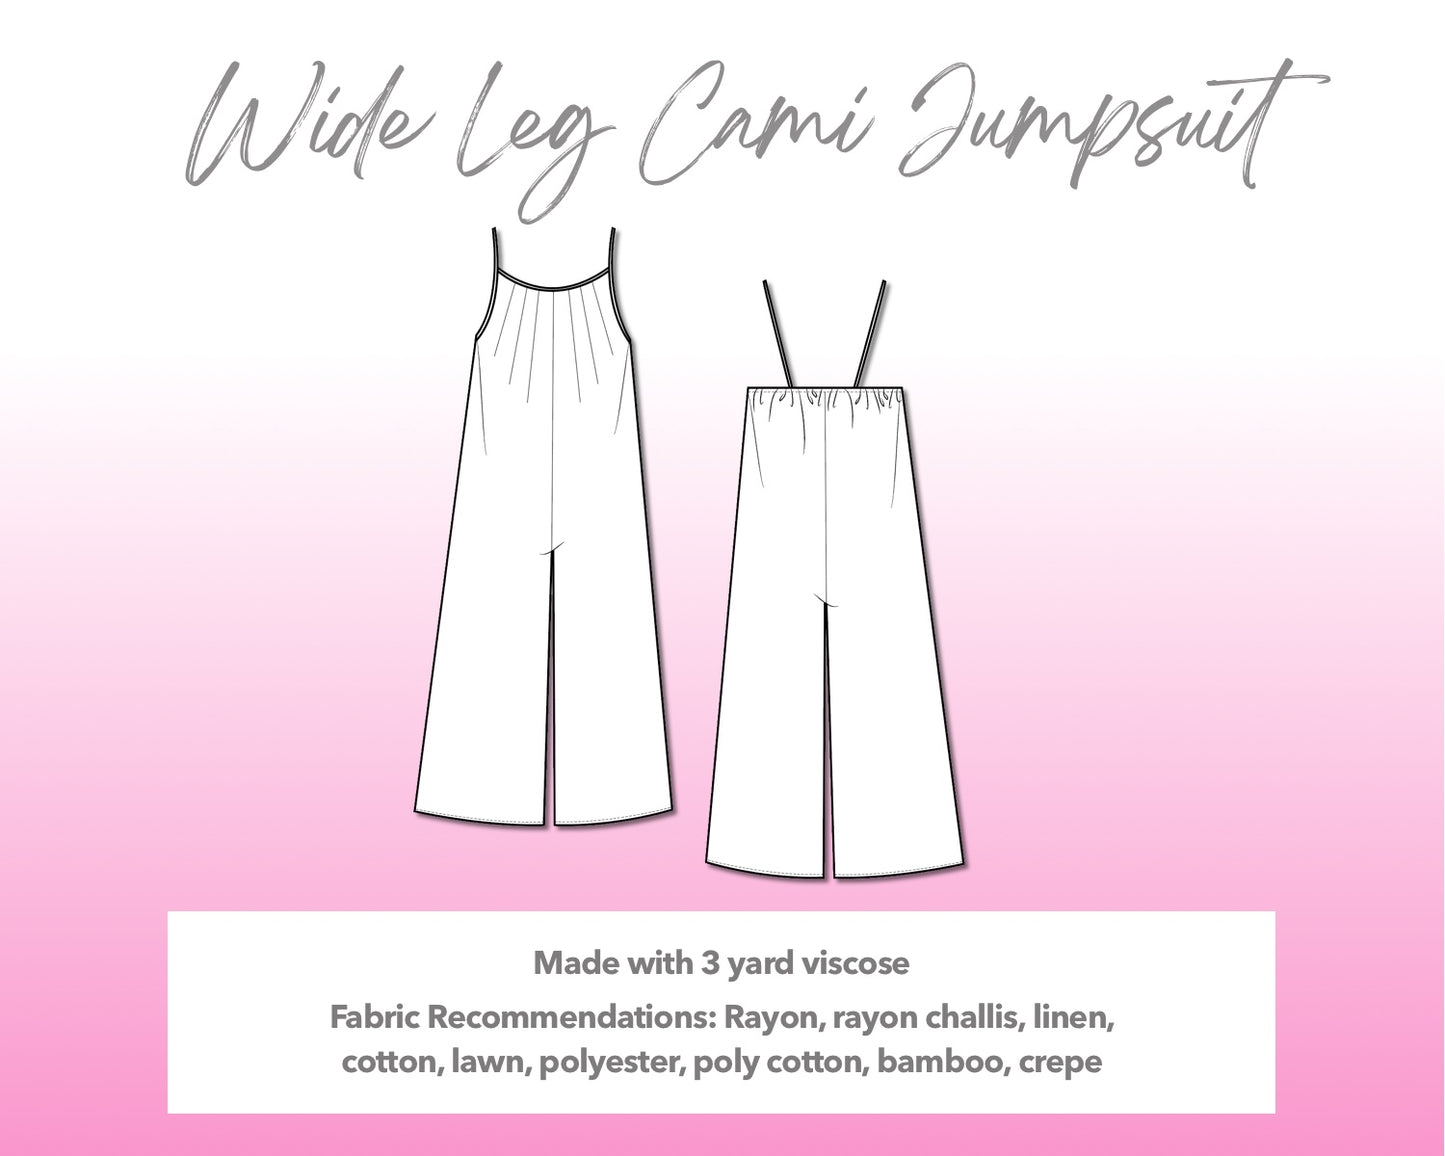 Illustration and detailed description for Wide Leg Cami Jumpsuit sewing pattern.